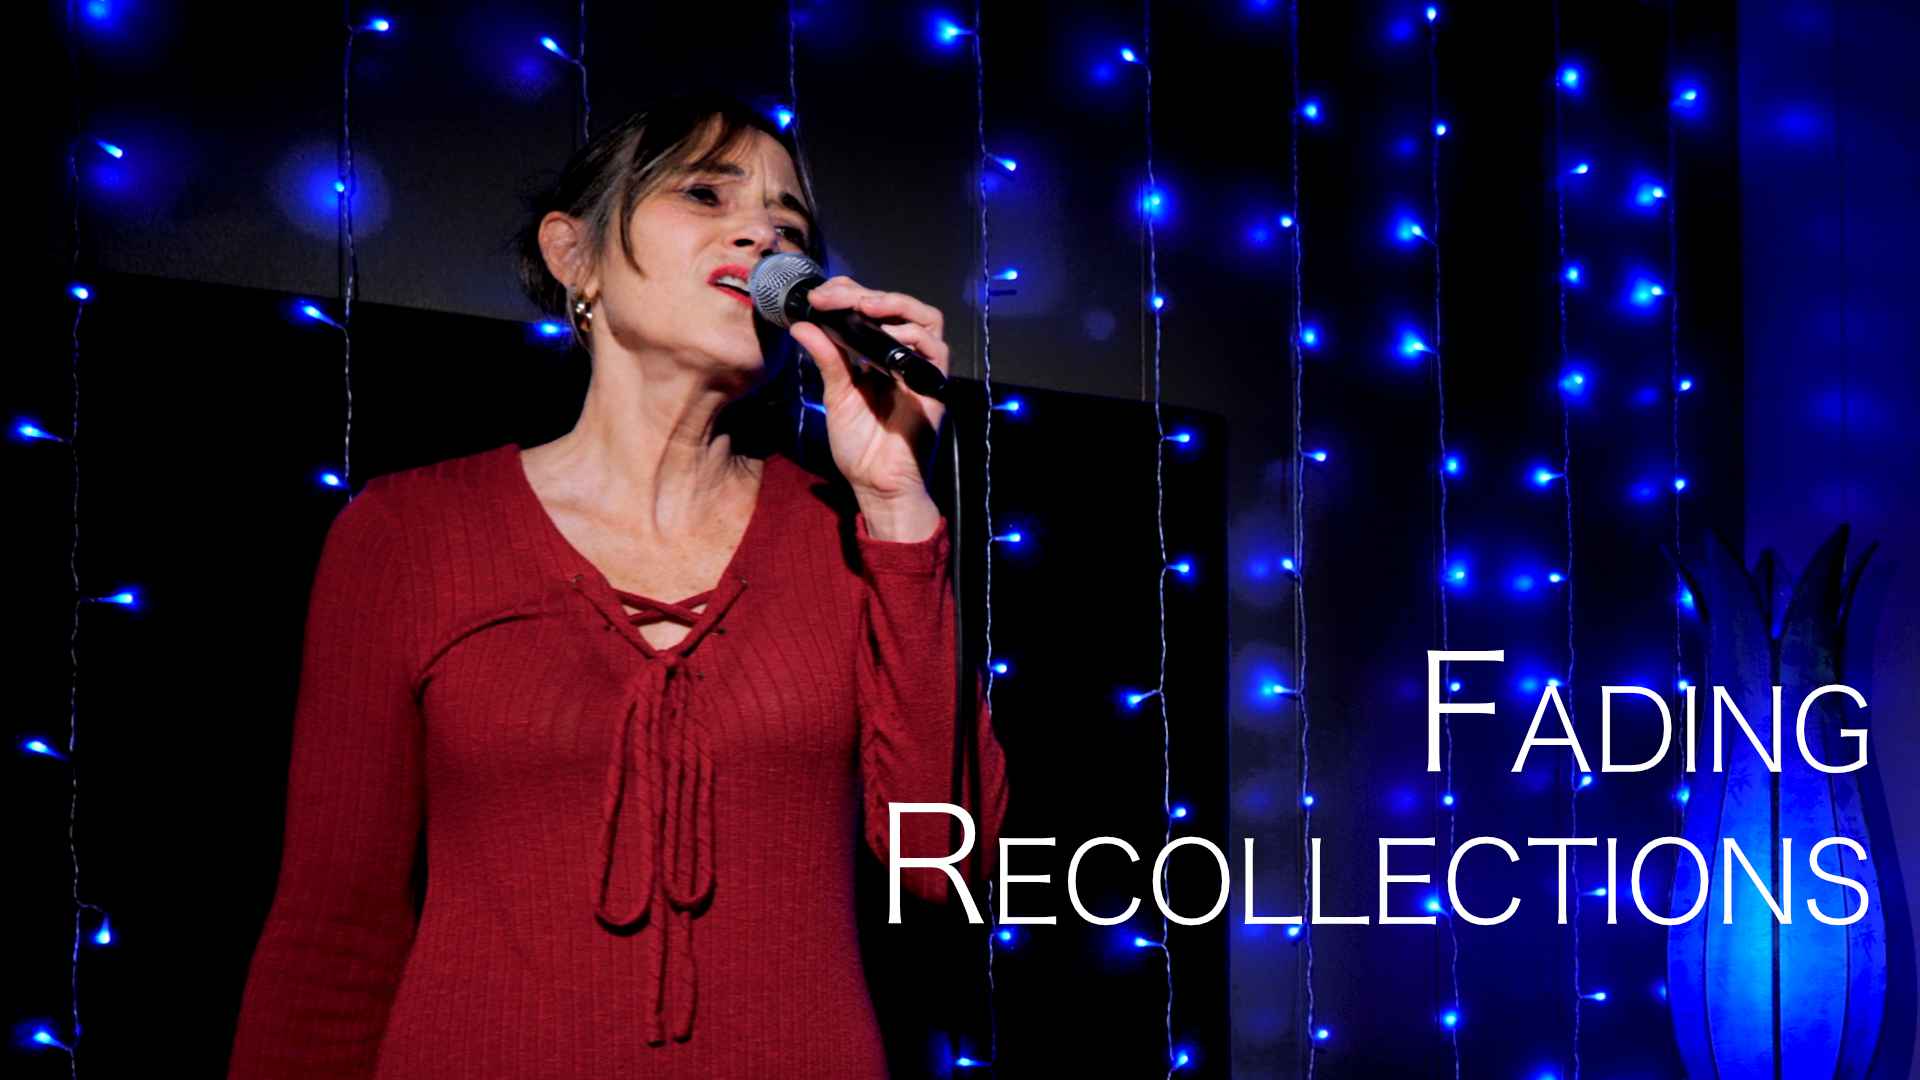 Video - 'Fading Recollections'